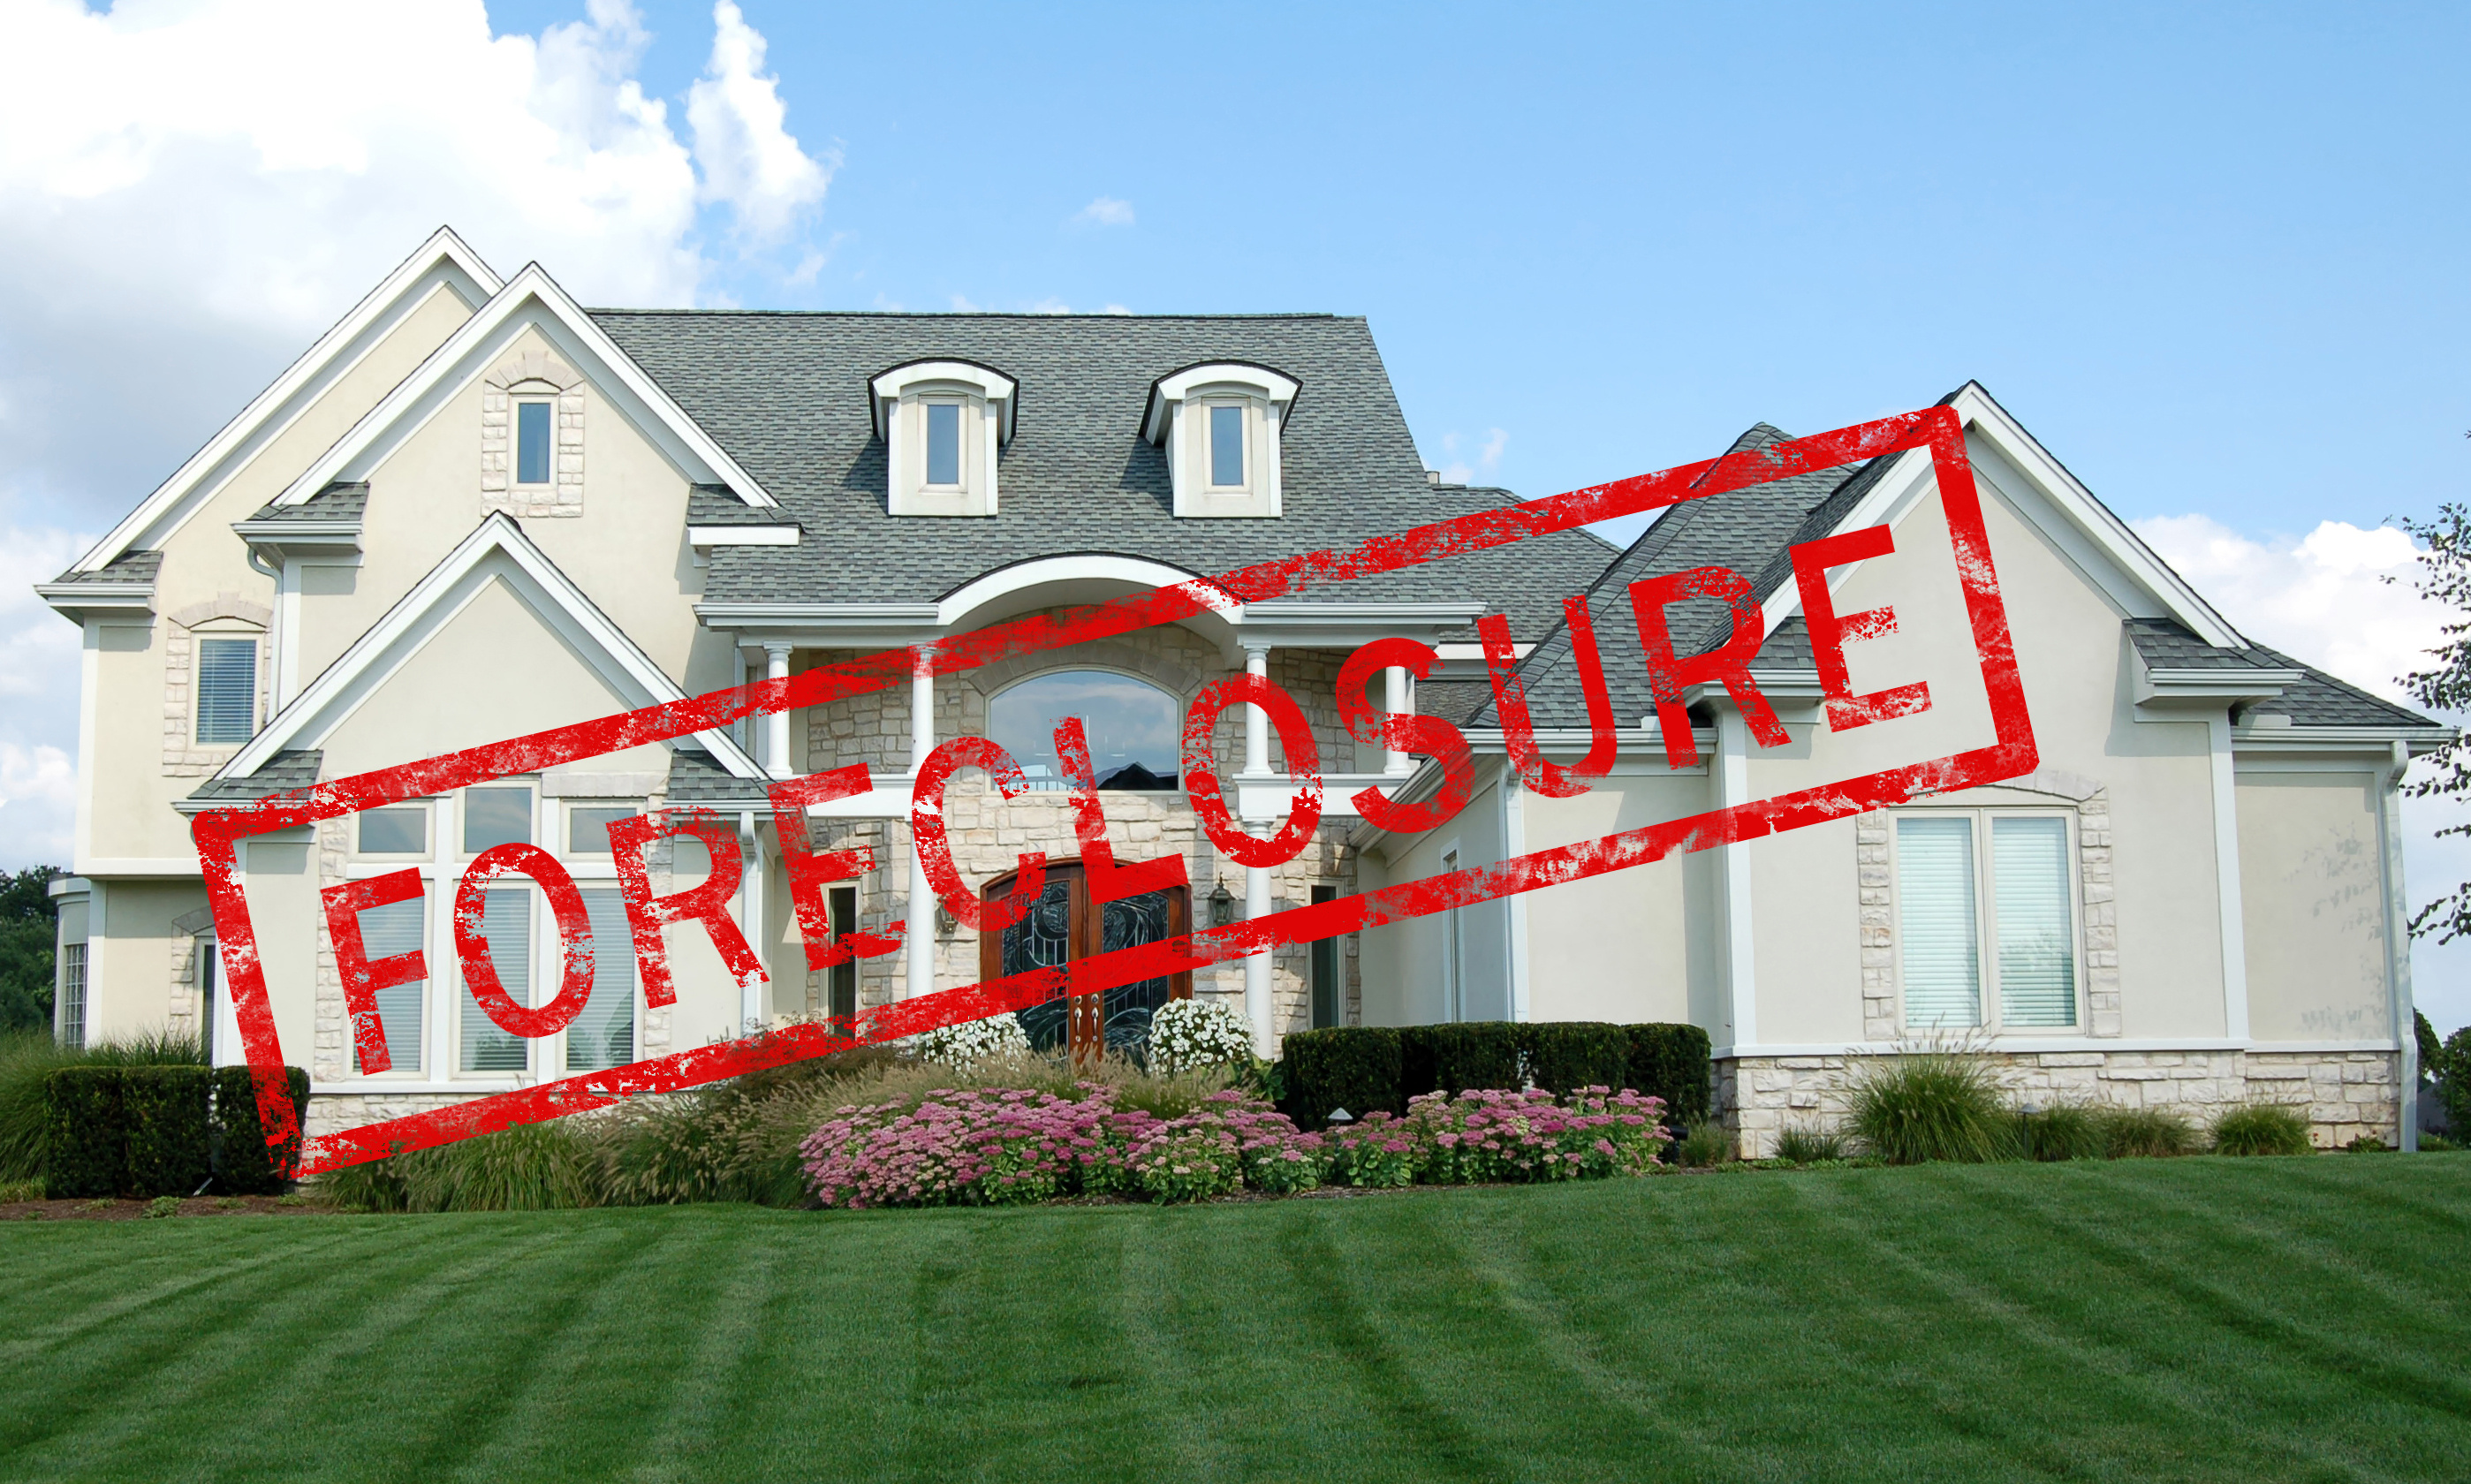 Call Property One Appraisals to order appraisals for Orange foreclosures